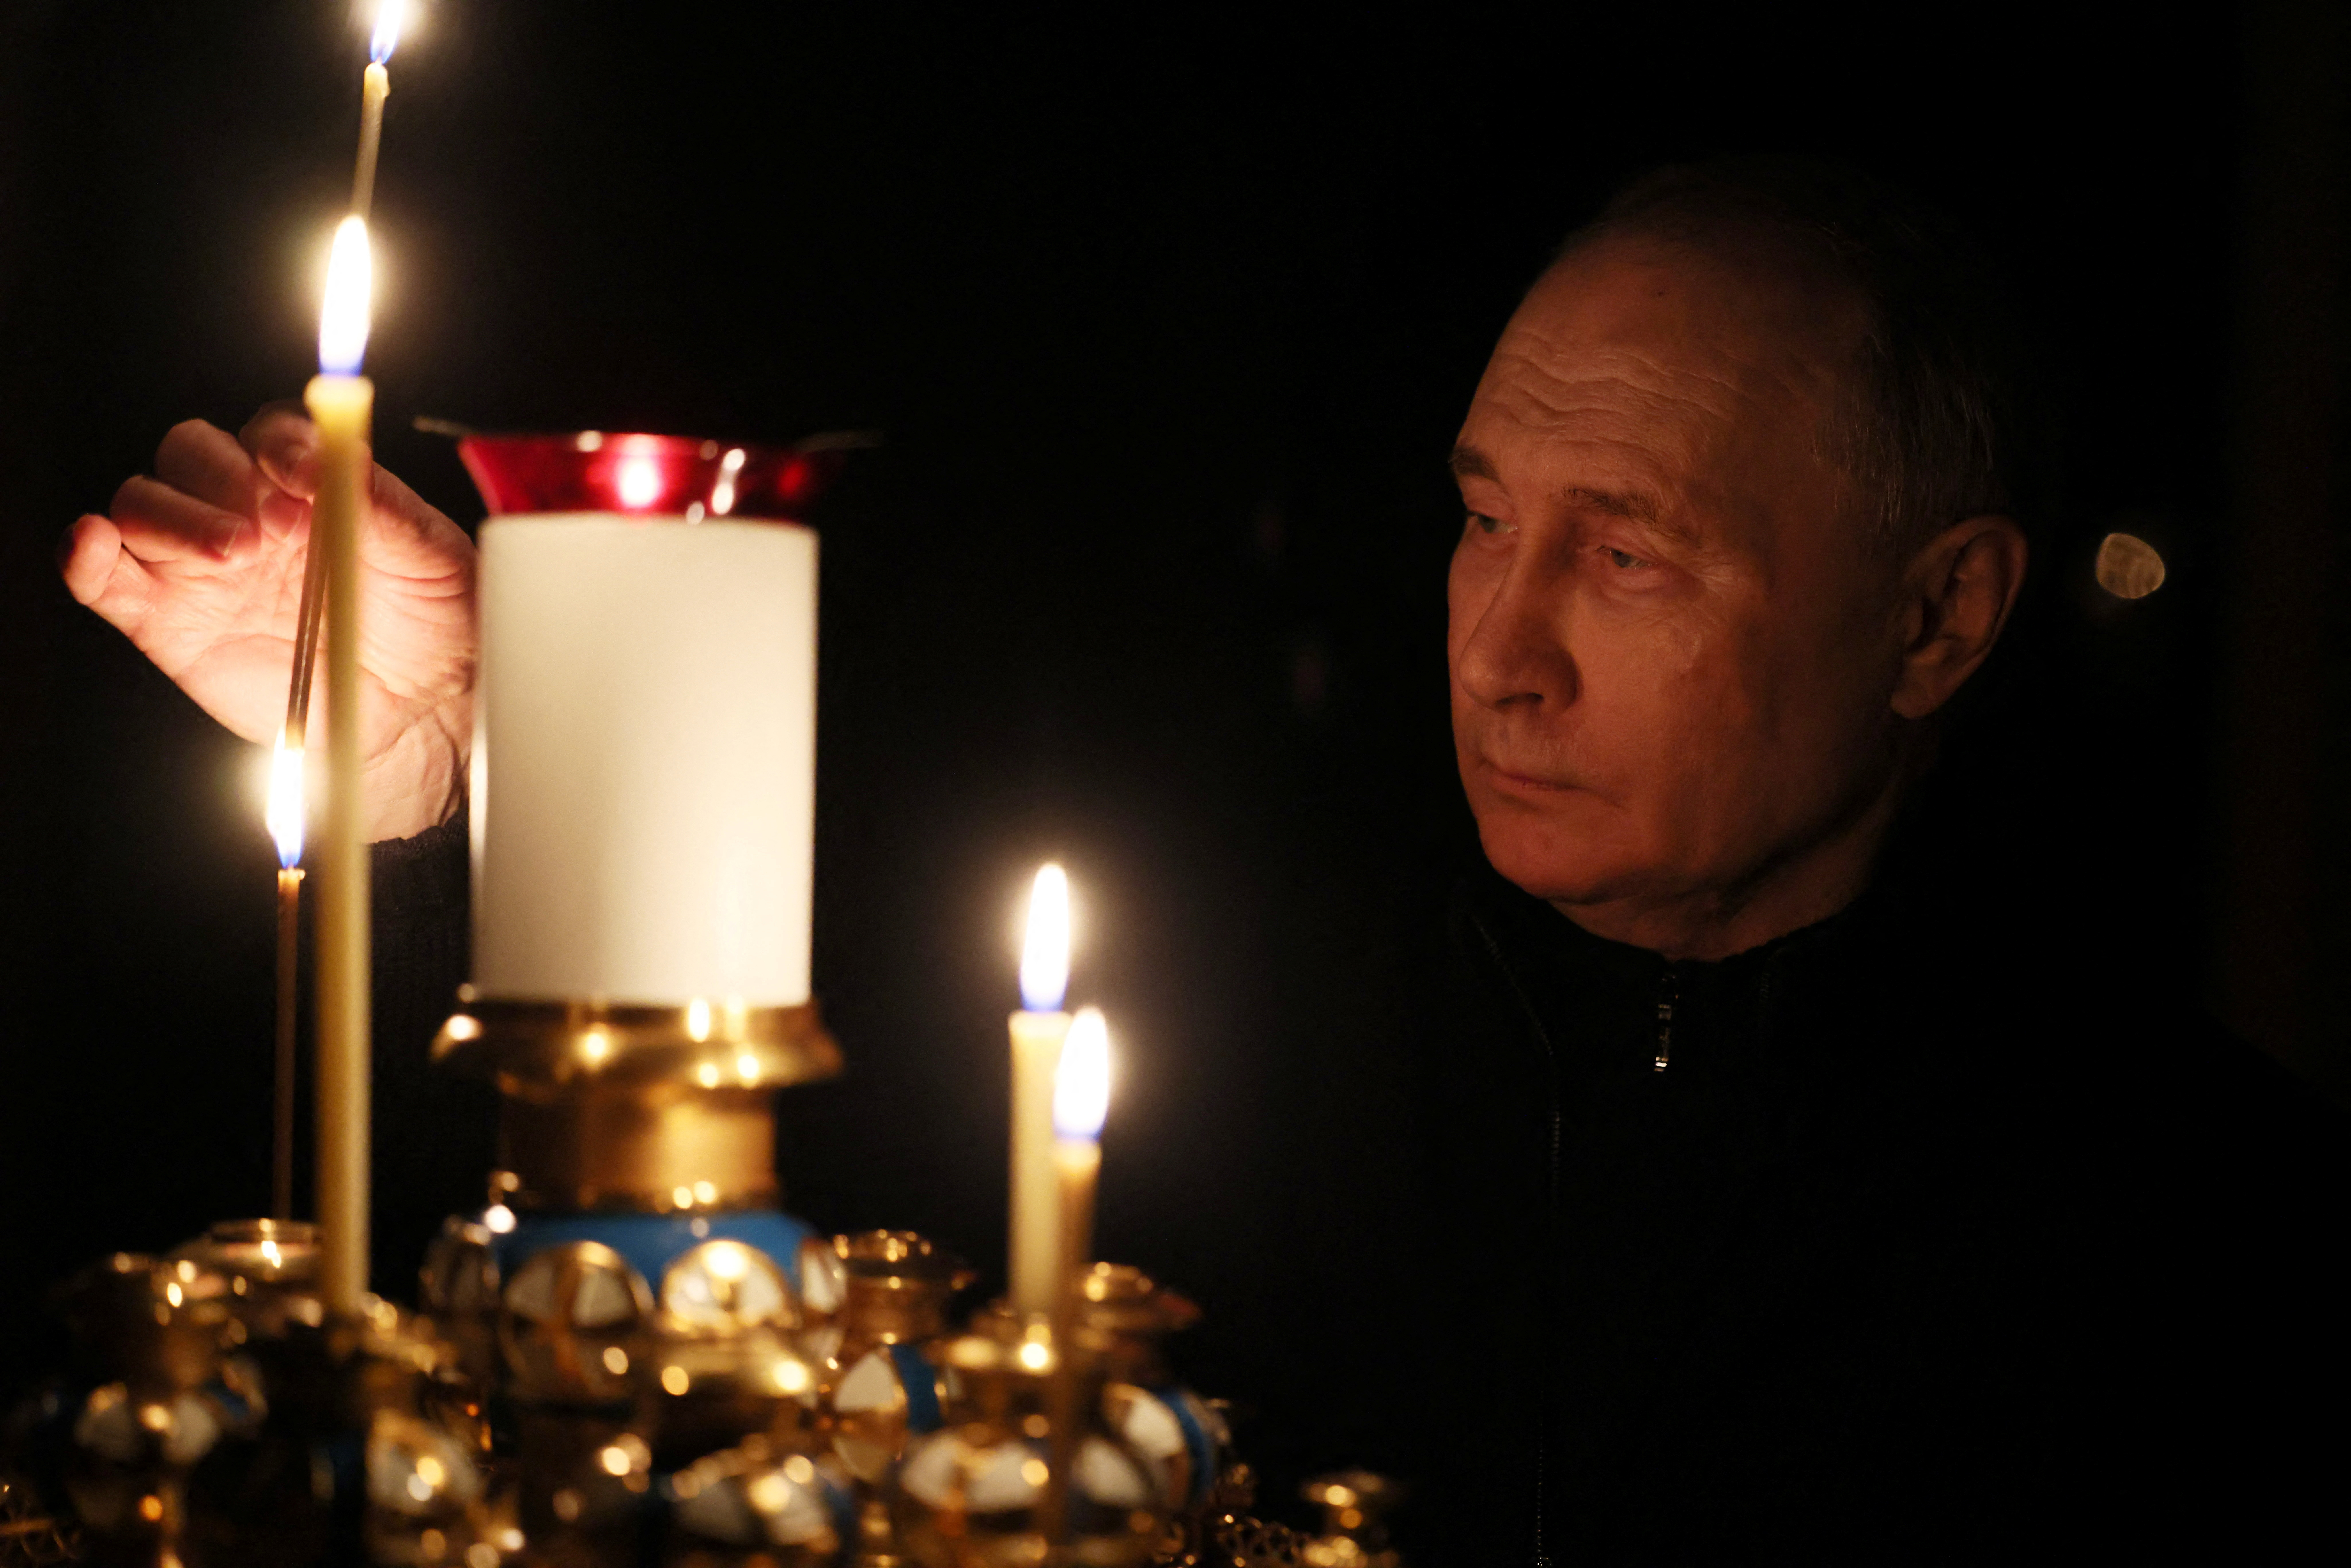 Russian President Putin lights a candle in memory of the victims of the Crocus City Hall attack, in Moscow Region